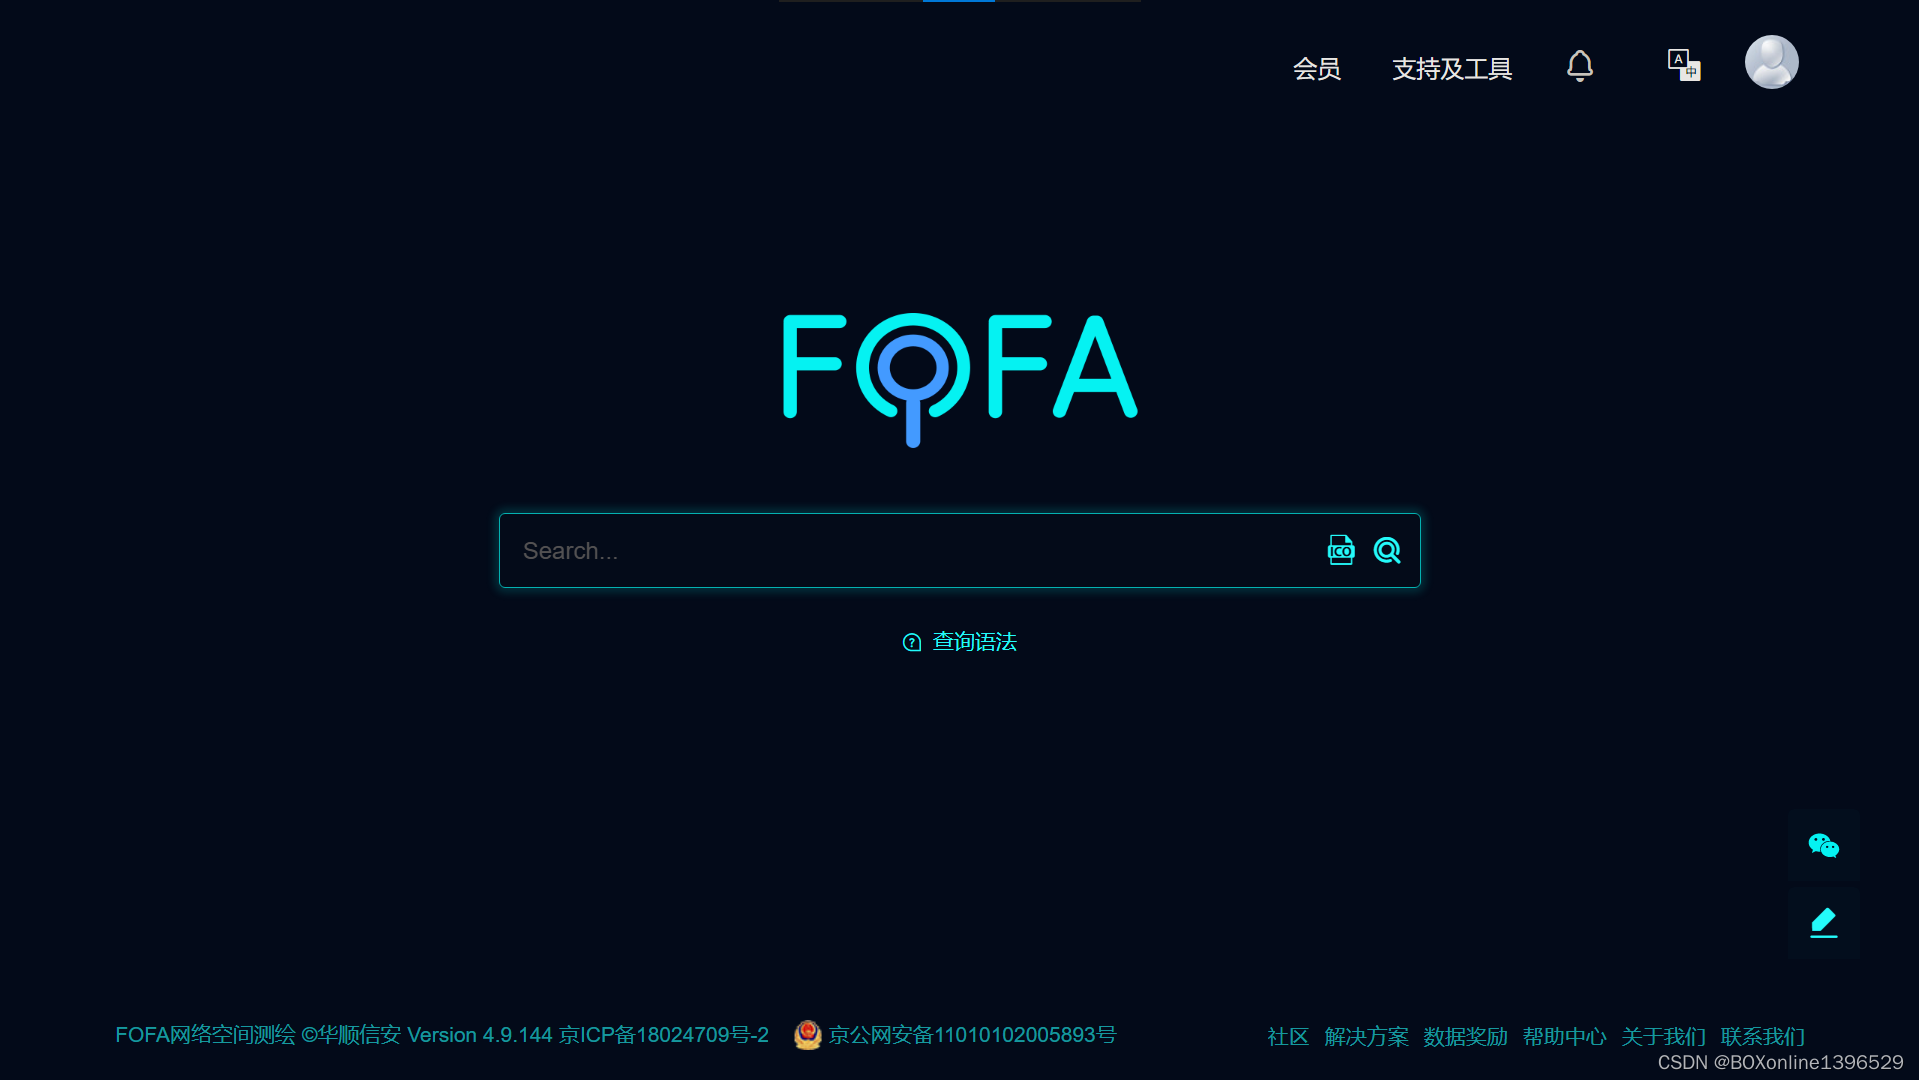 FOFA Official Website Homepage